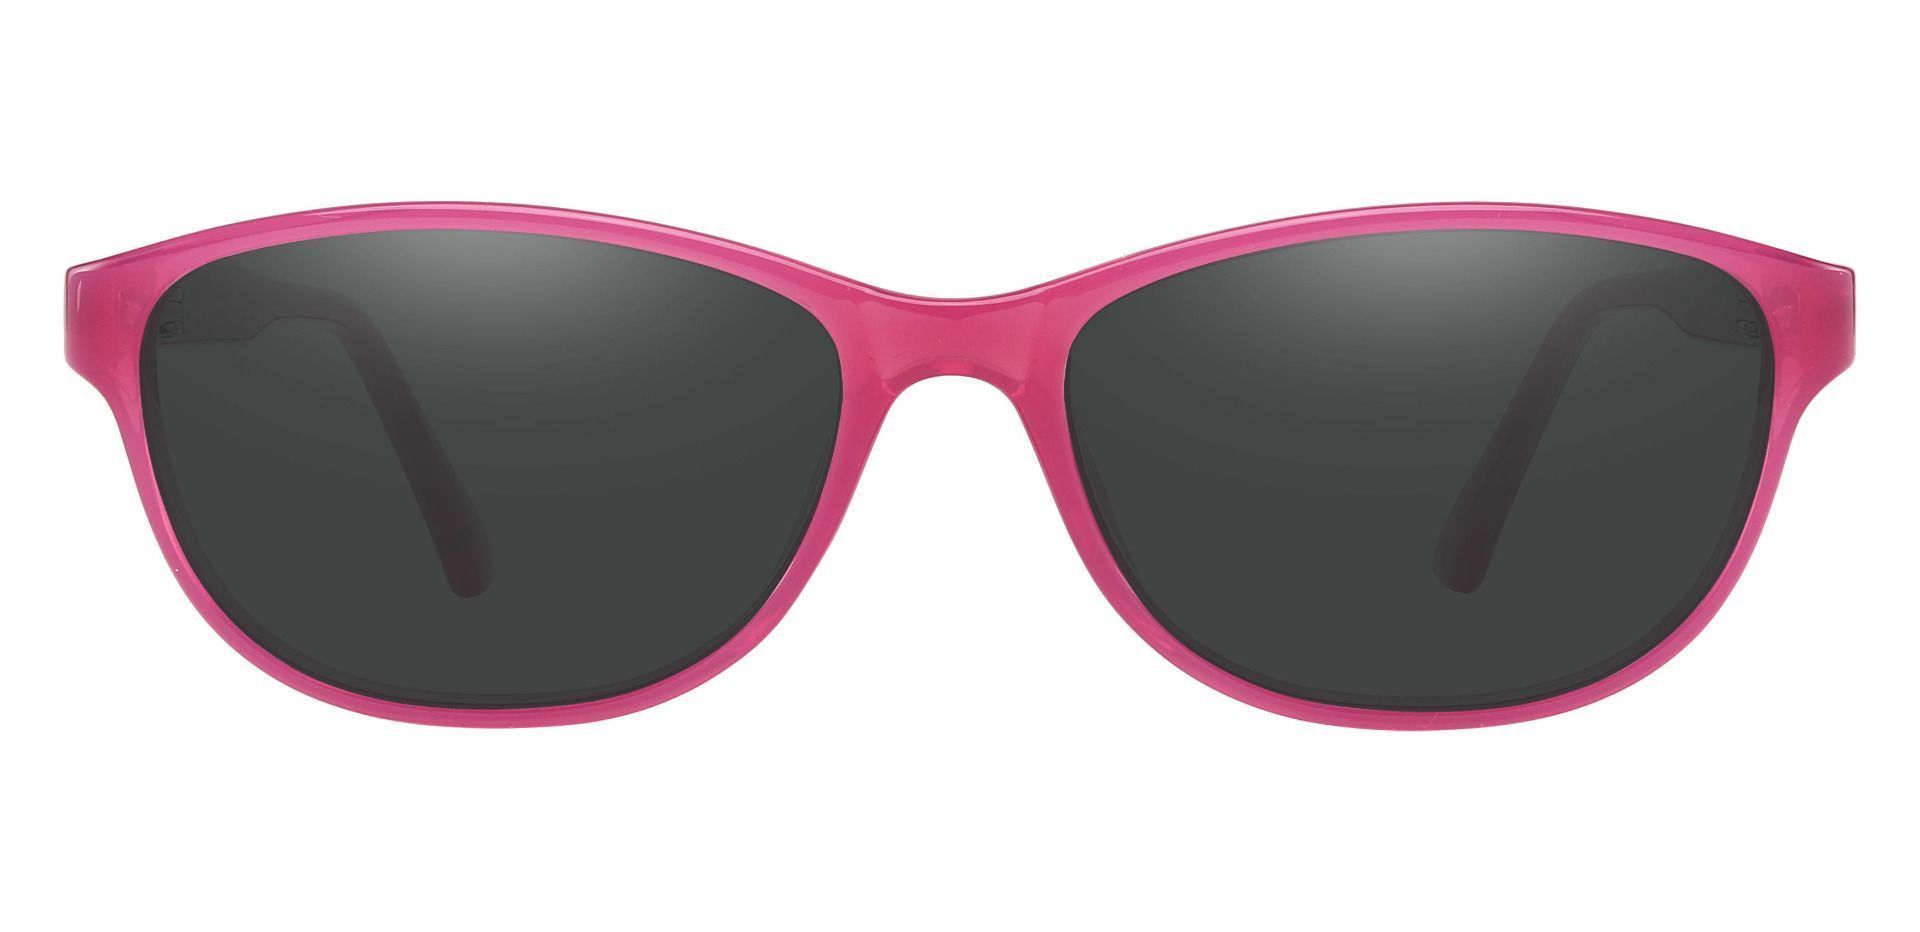 Patsy Oval Reading Sunglasses - Pink Frame With Gray Lenses